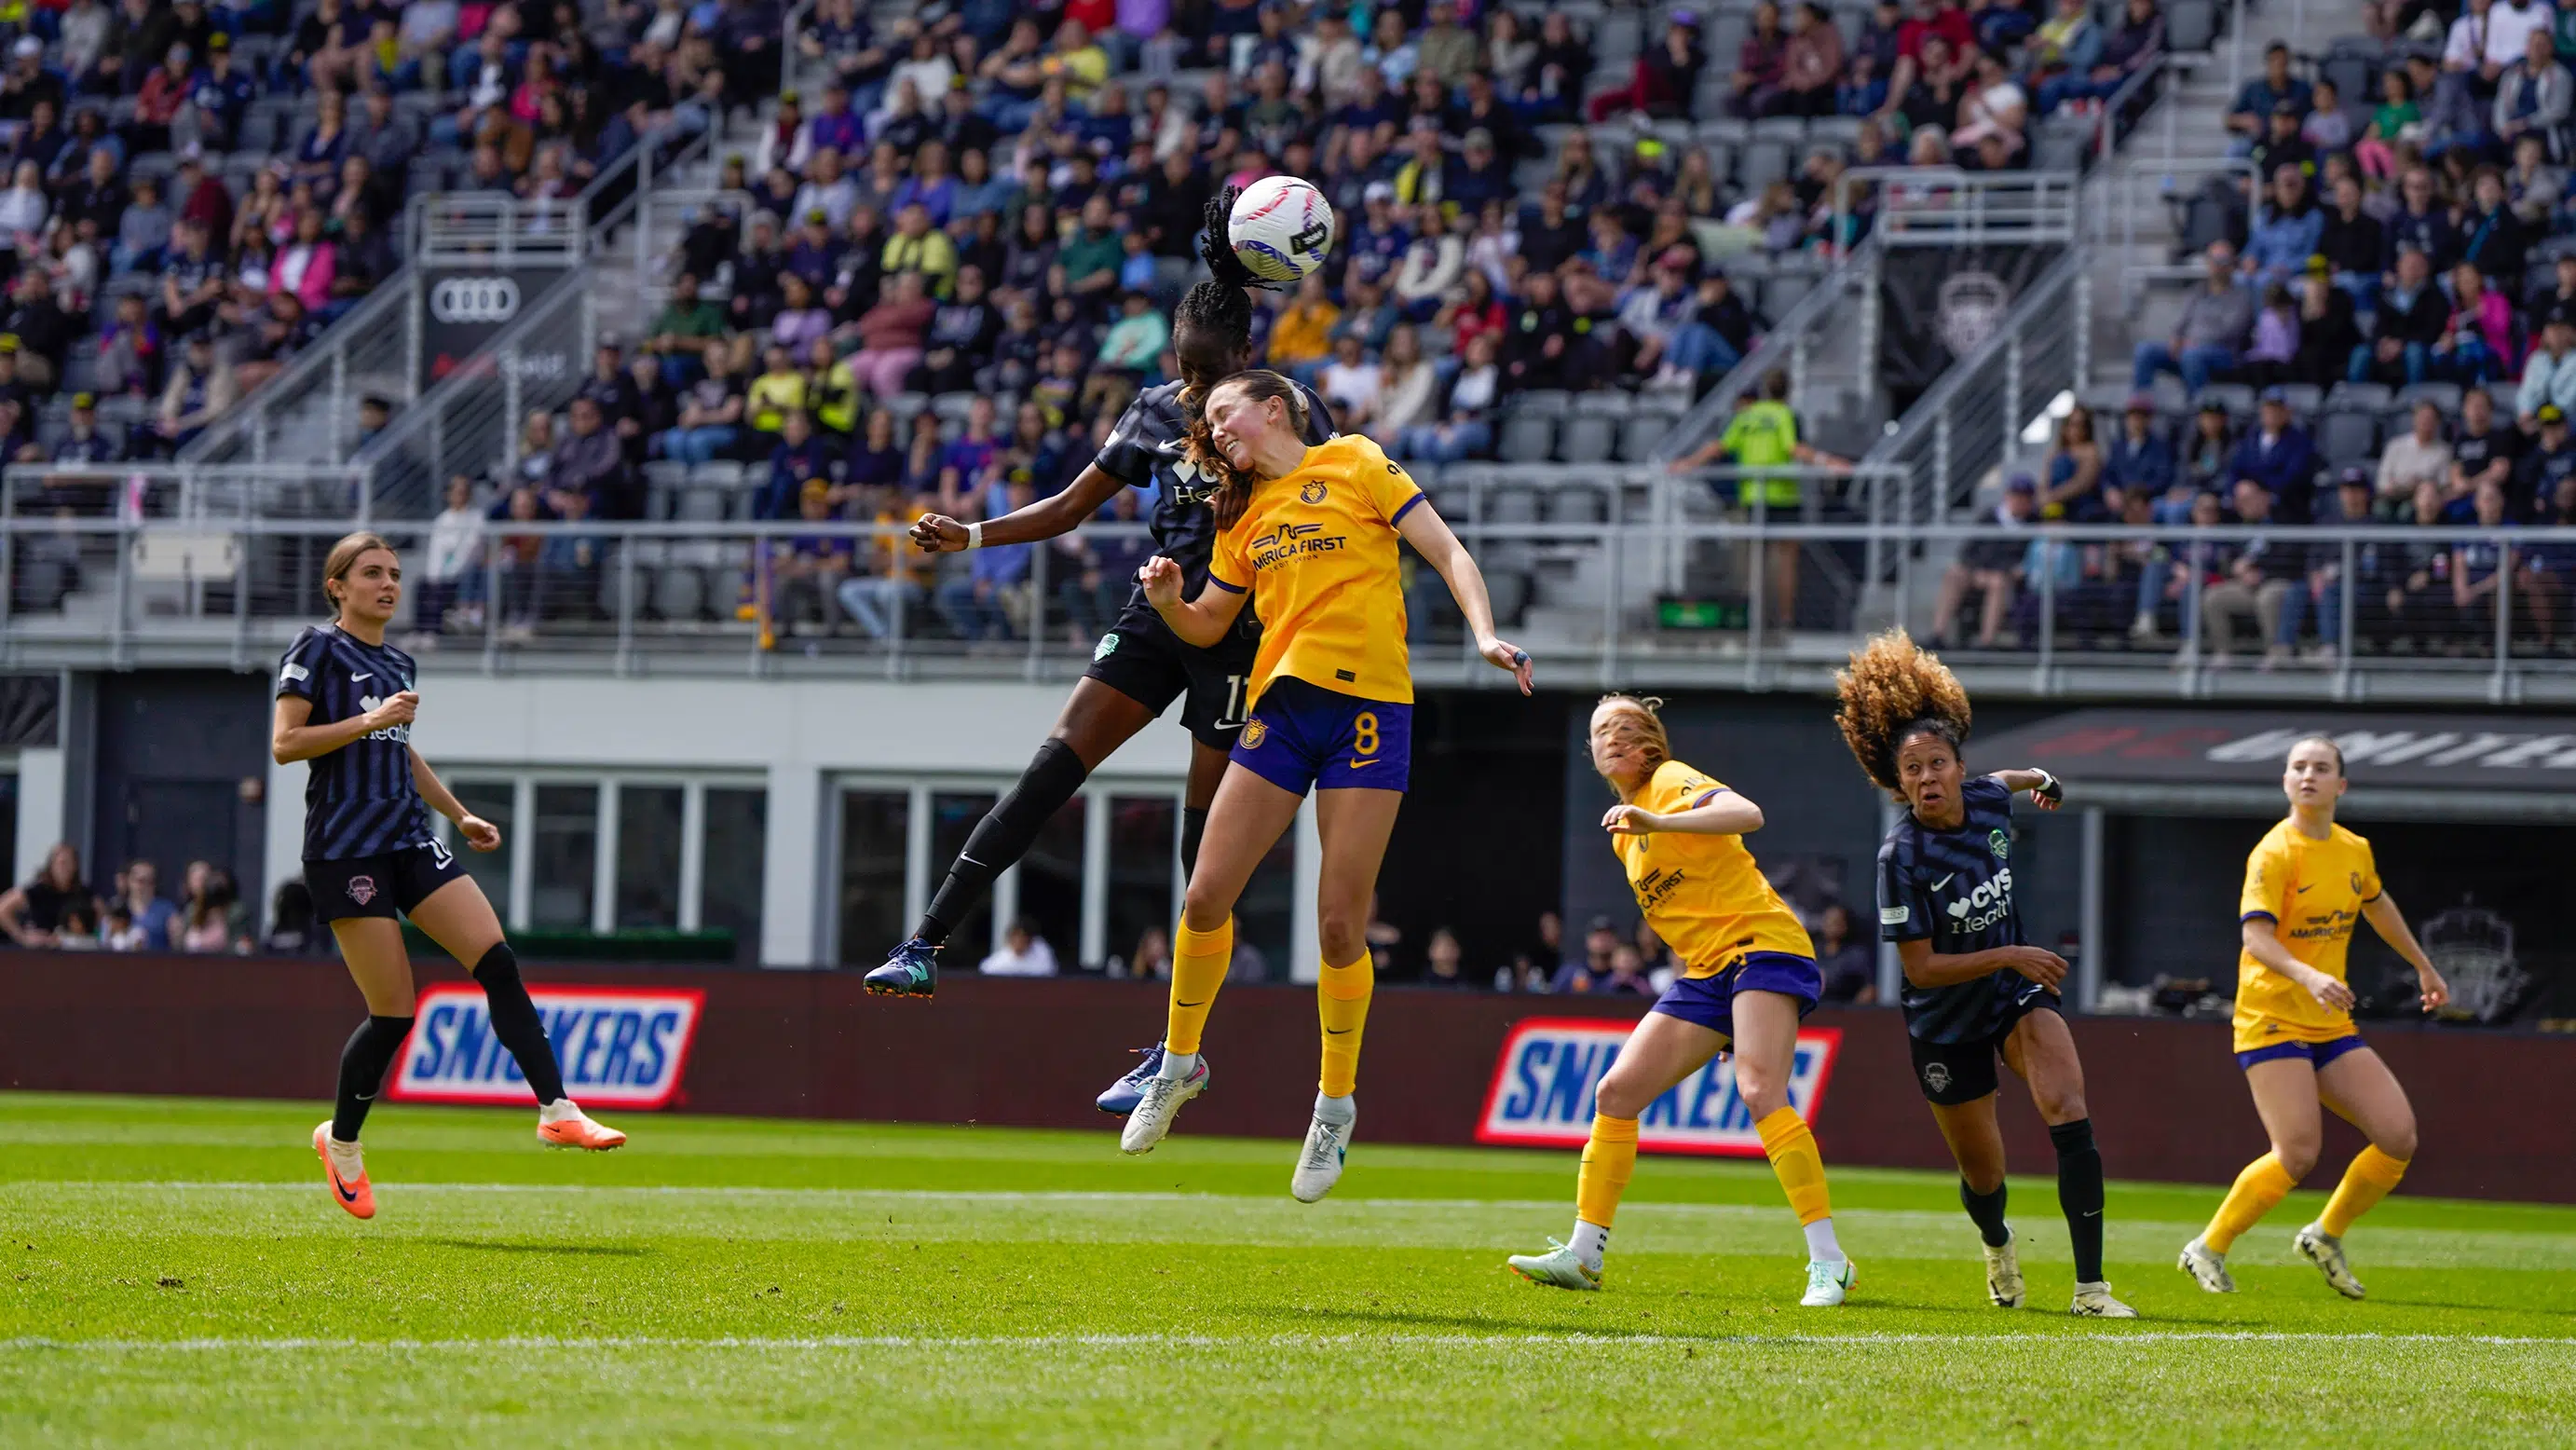 Ouleye Sarr and a Utah Royals player jump up to head a soccer ball.